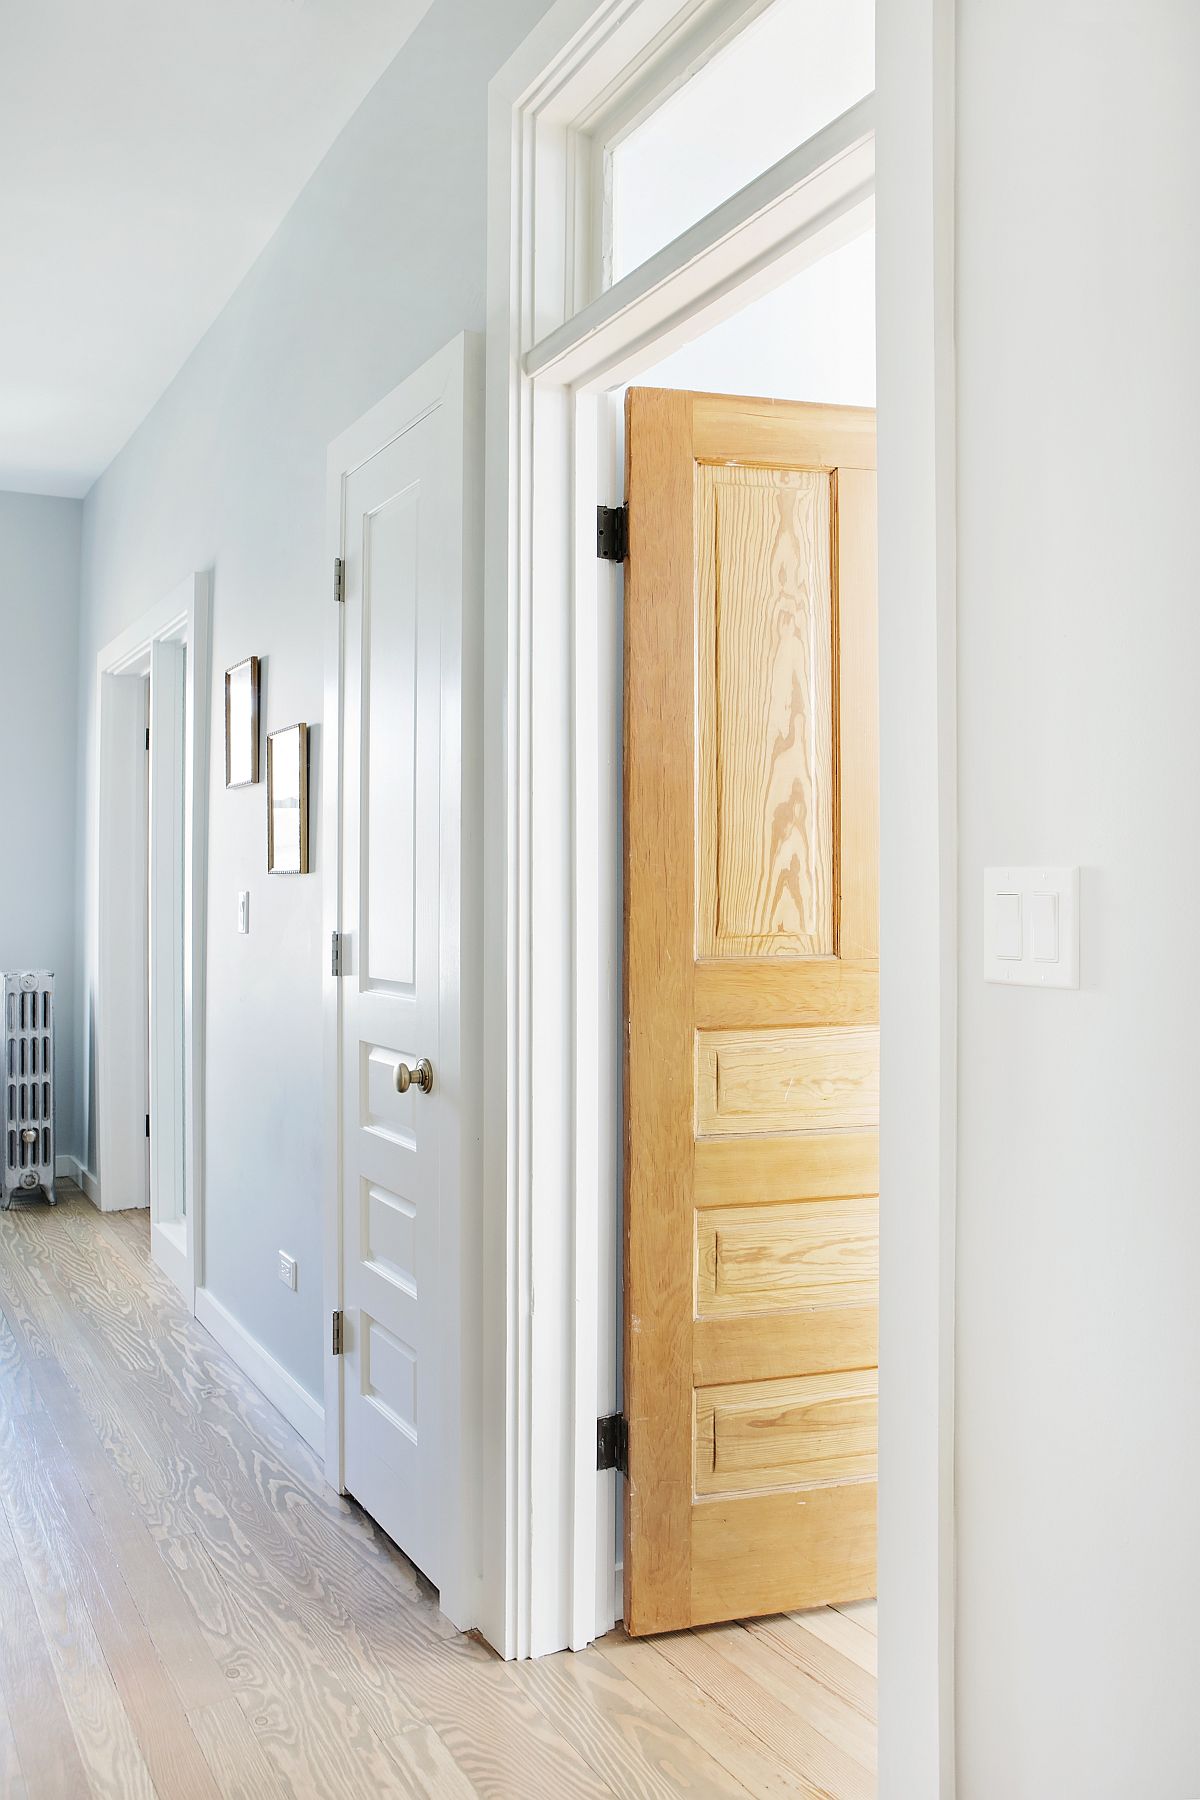 Large hallway of the home in white with ample natural light and wood walls for the room